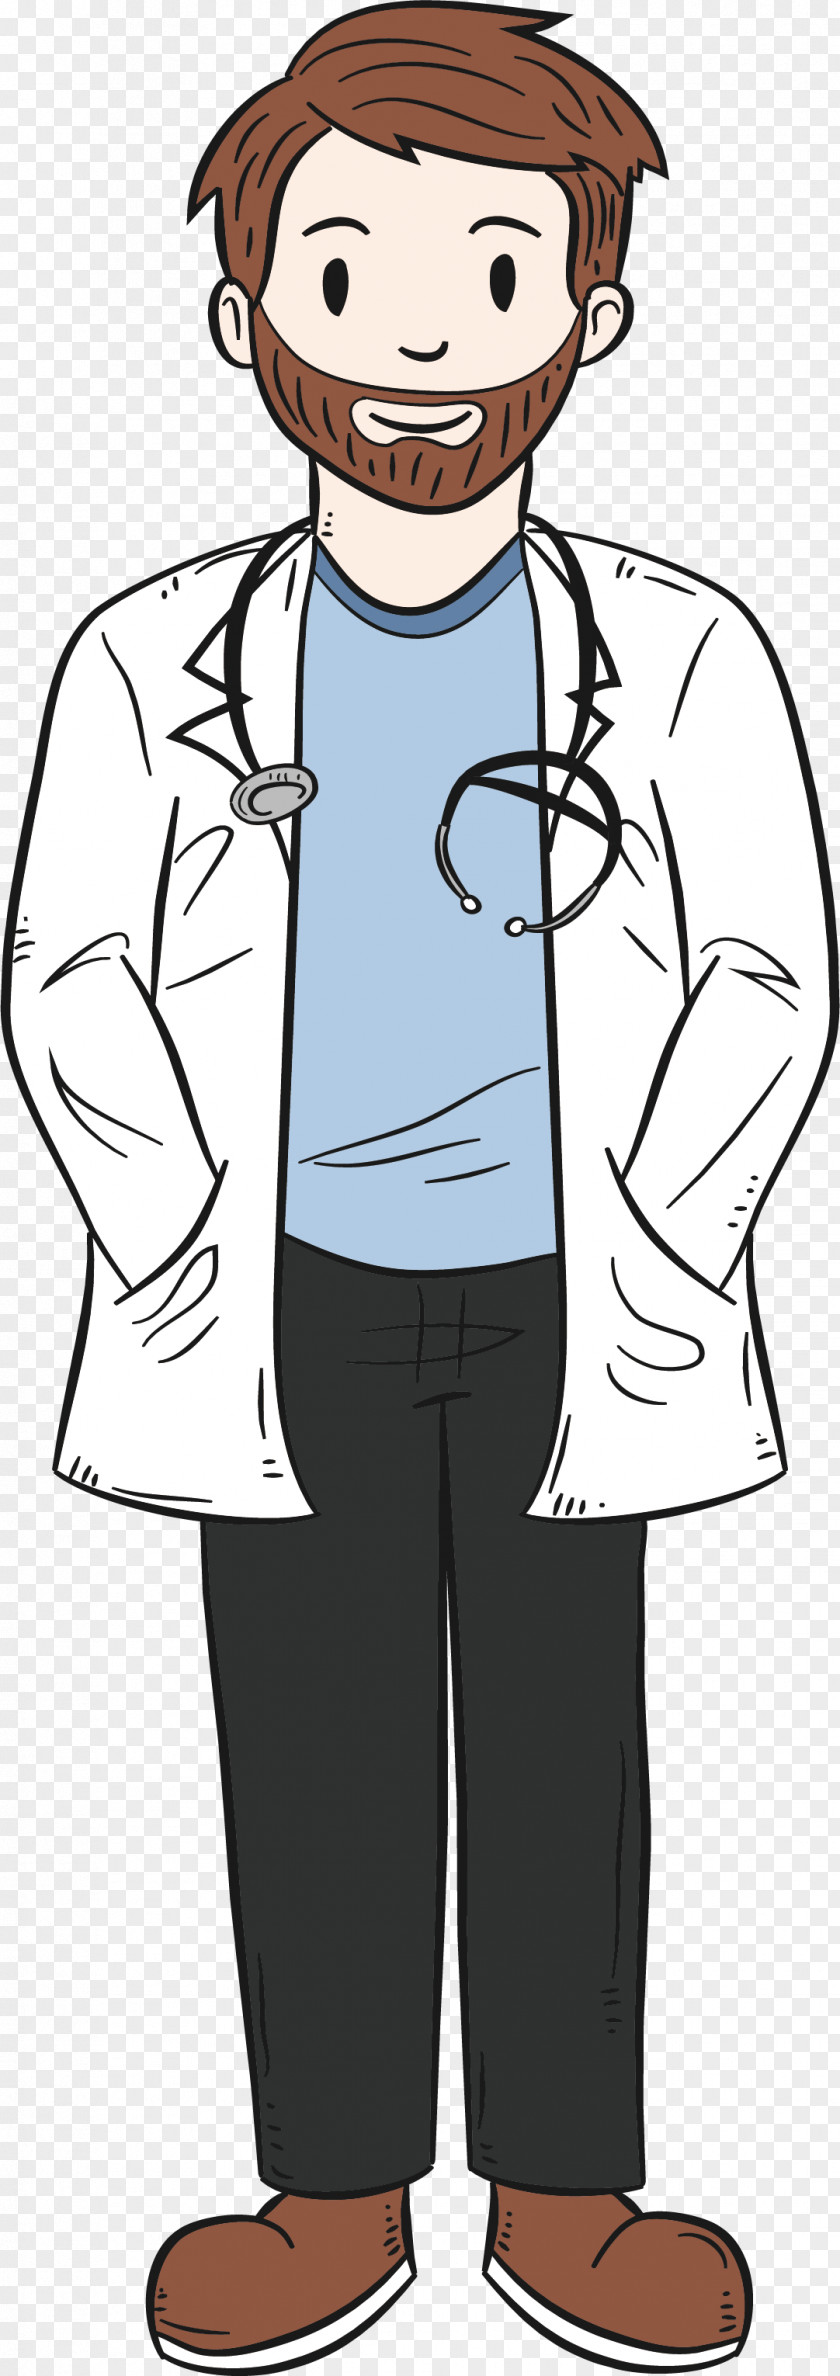 Hand Painted Foreign Doctor Physician Surgeon Illustration PNG